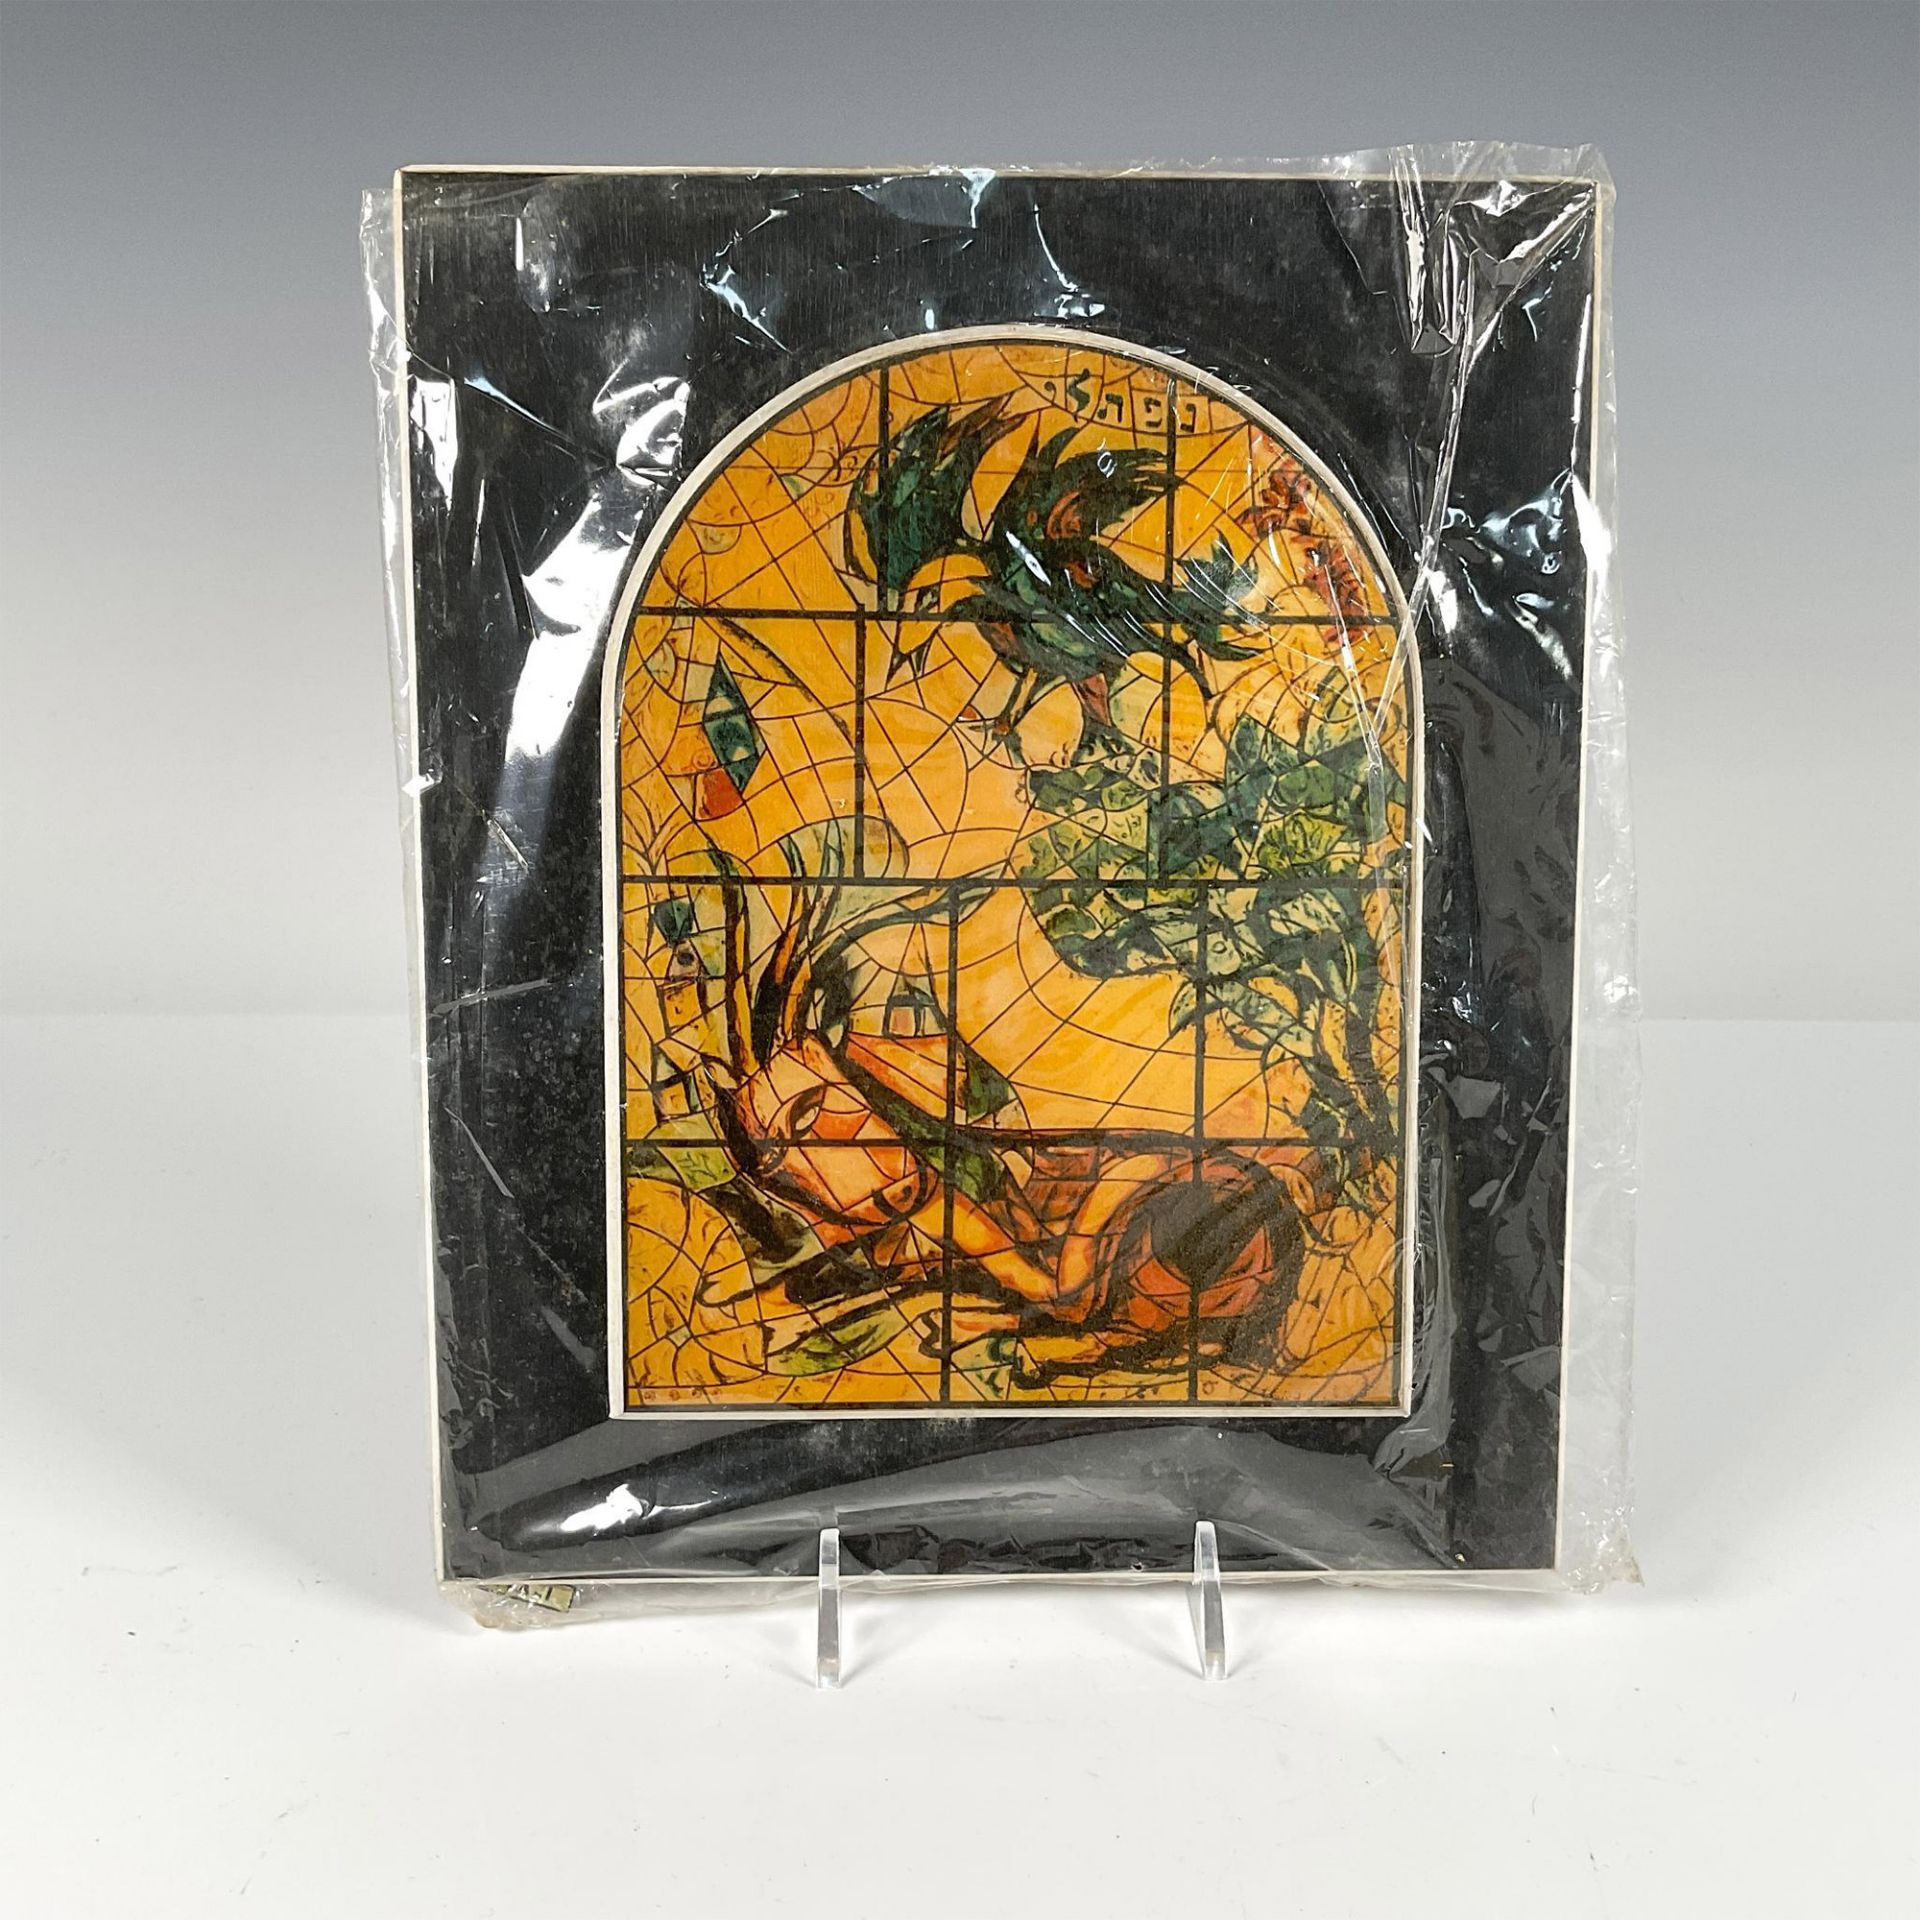 13pc After Marc Chagall by Avissar Wooden Plaques, The 12 Stained Glass Windows - Image 18 of 20